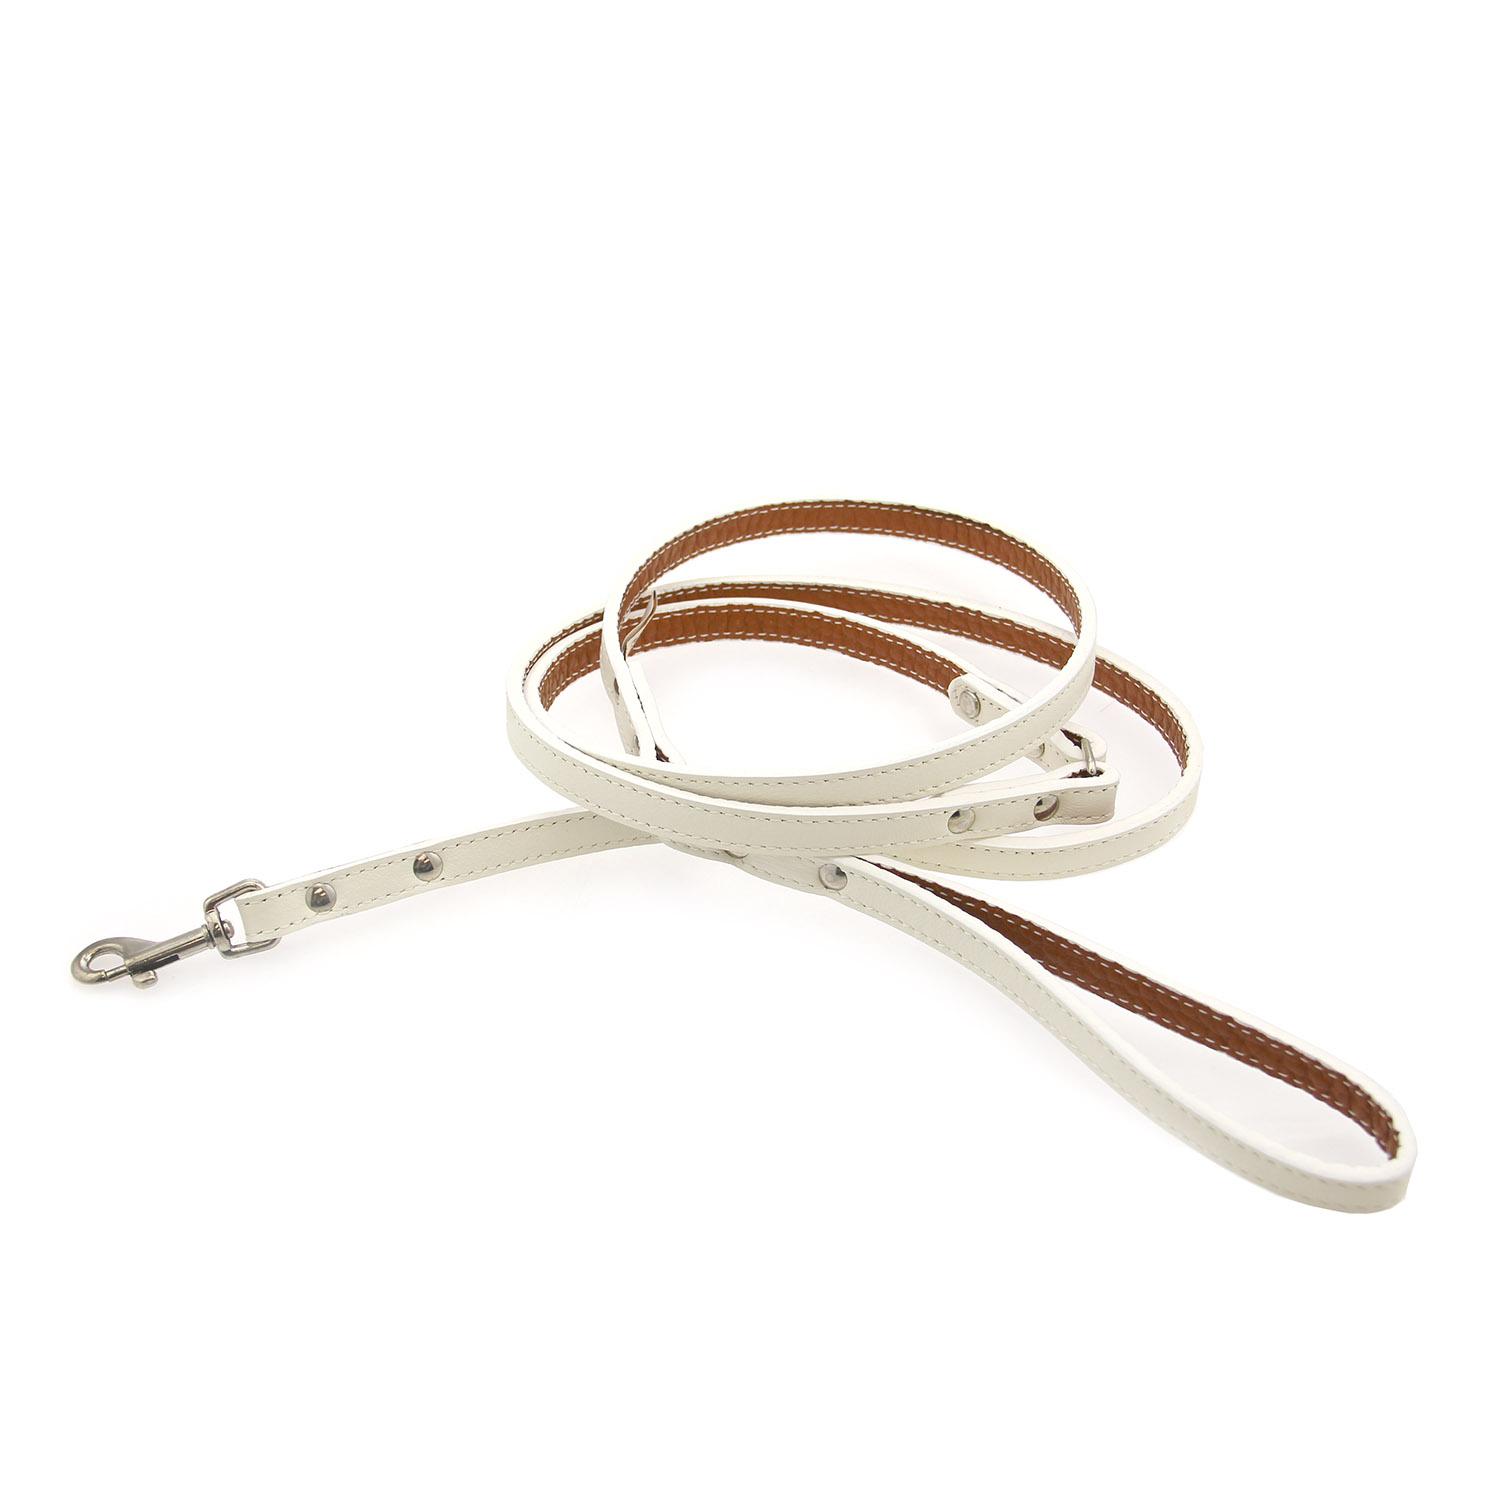 Tuscan Leather Dog Leash by Auburn Leather - White